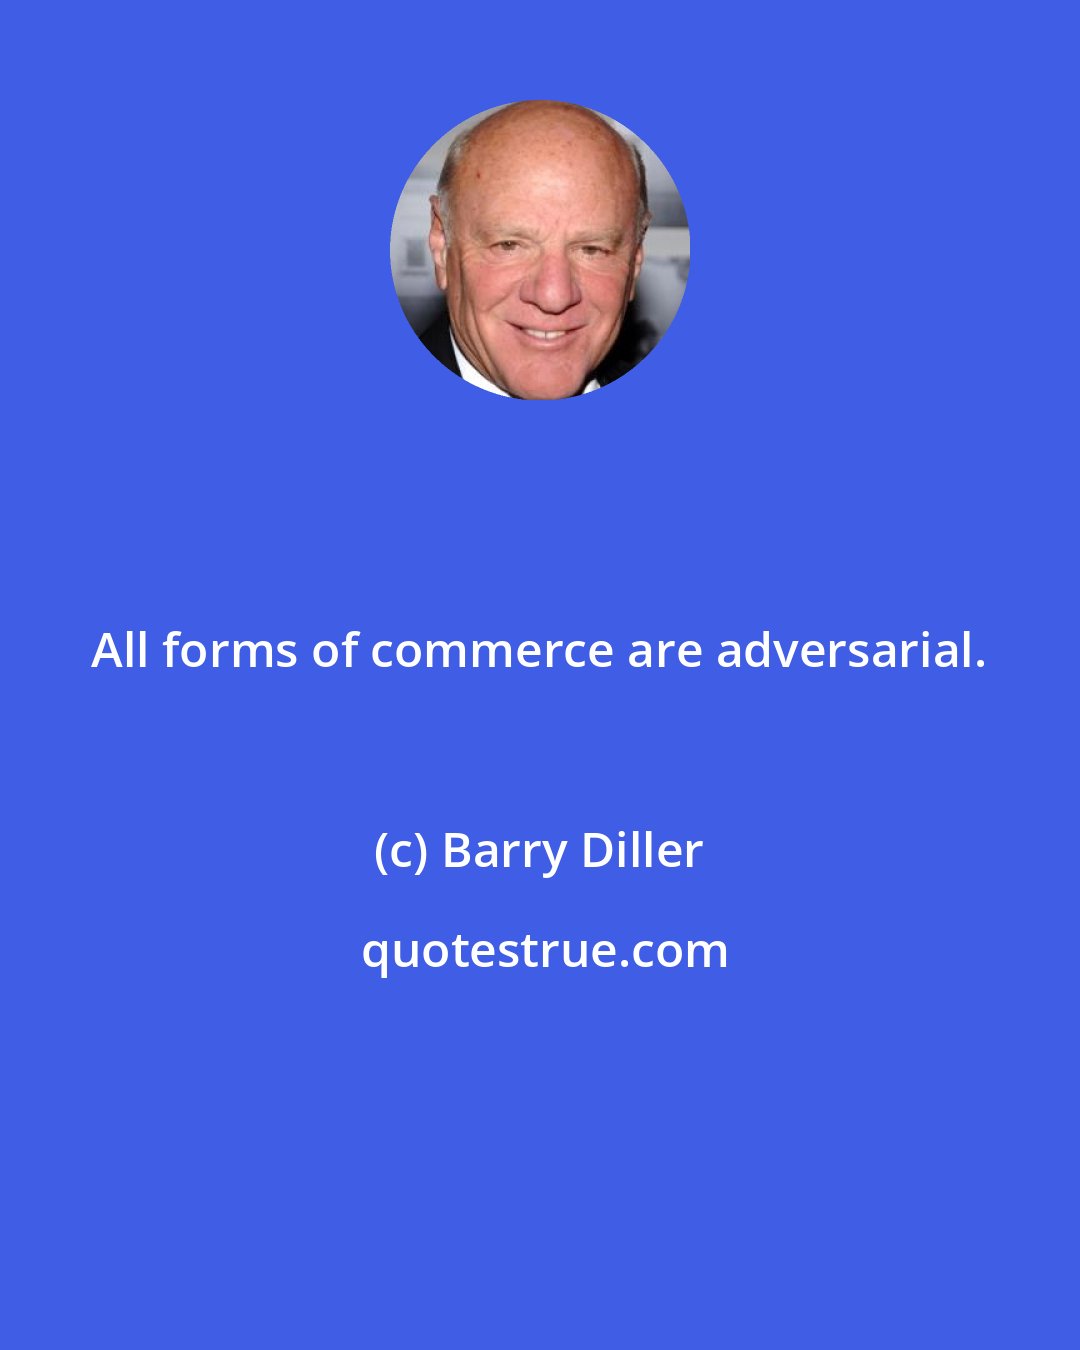 Barry Diller: All forms of commerce are adversarial.